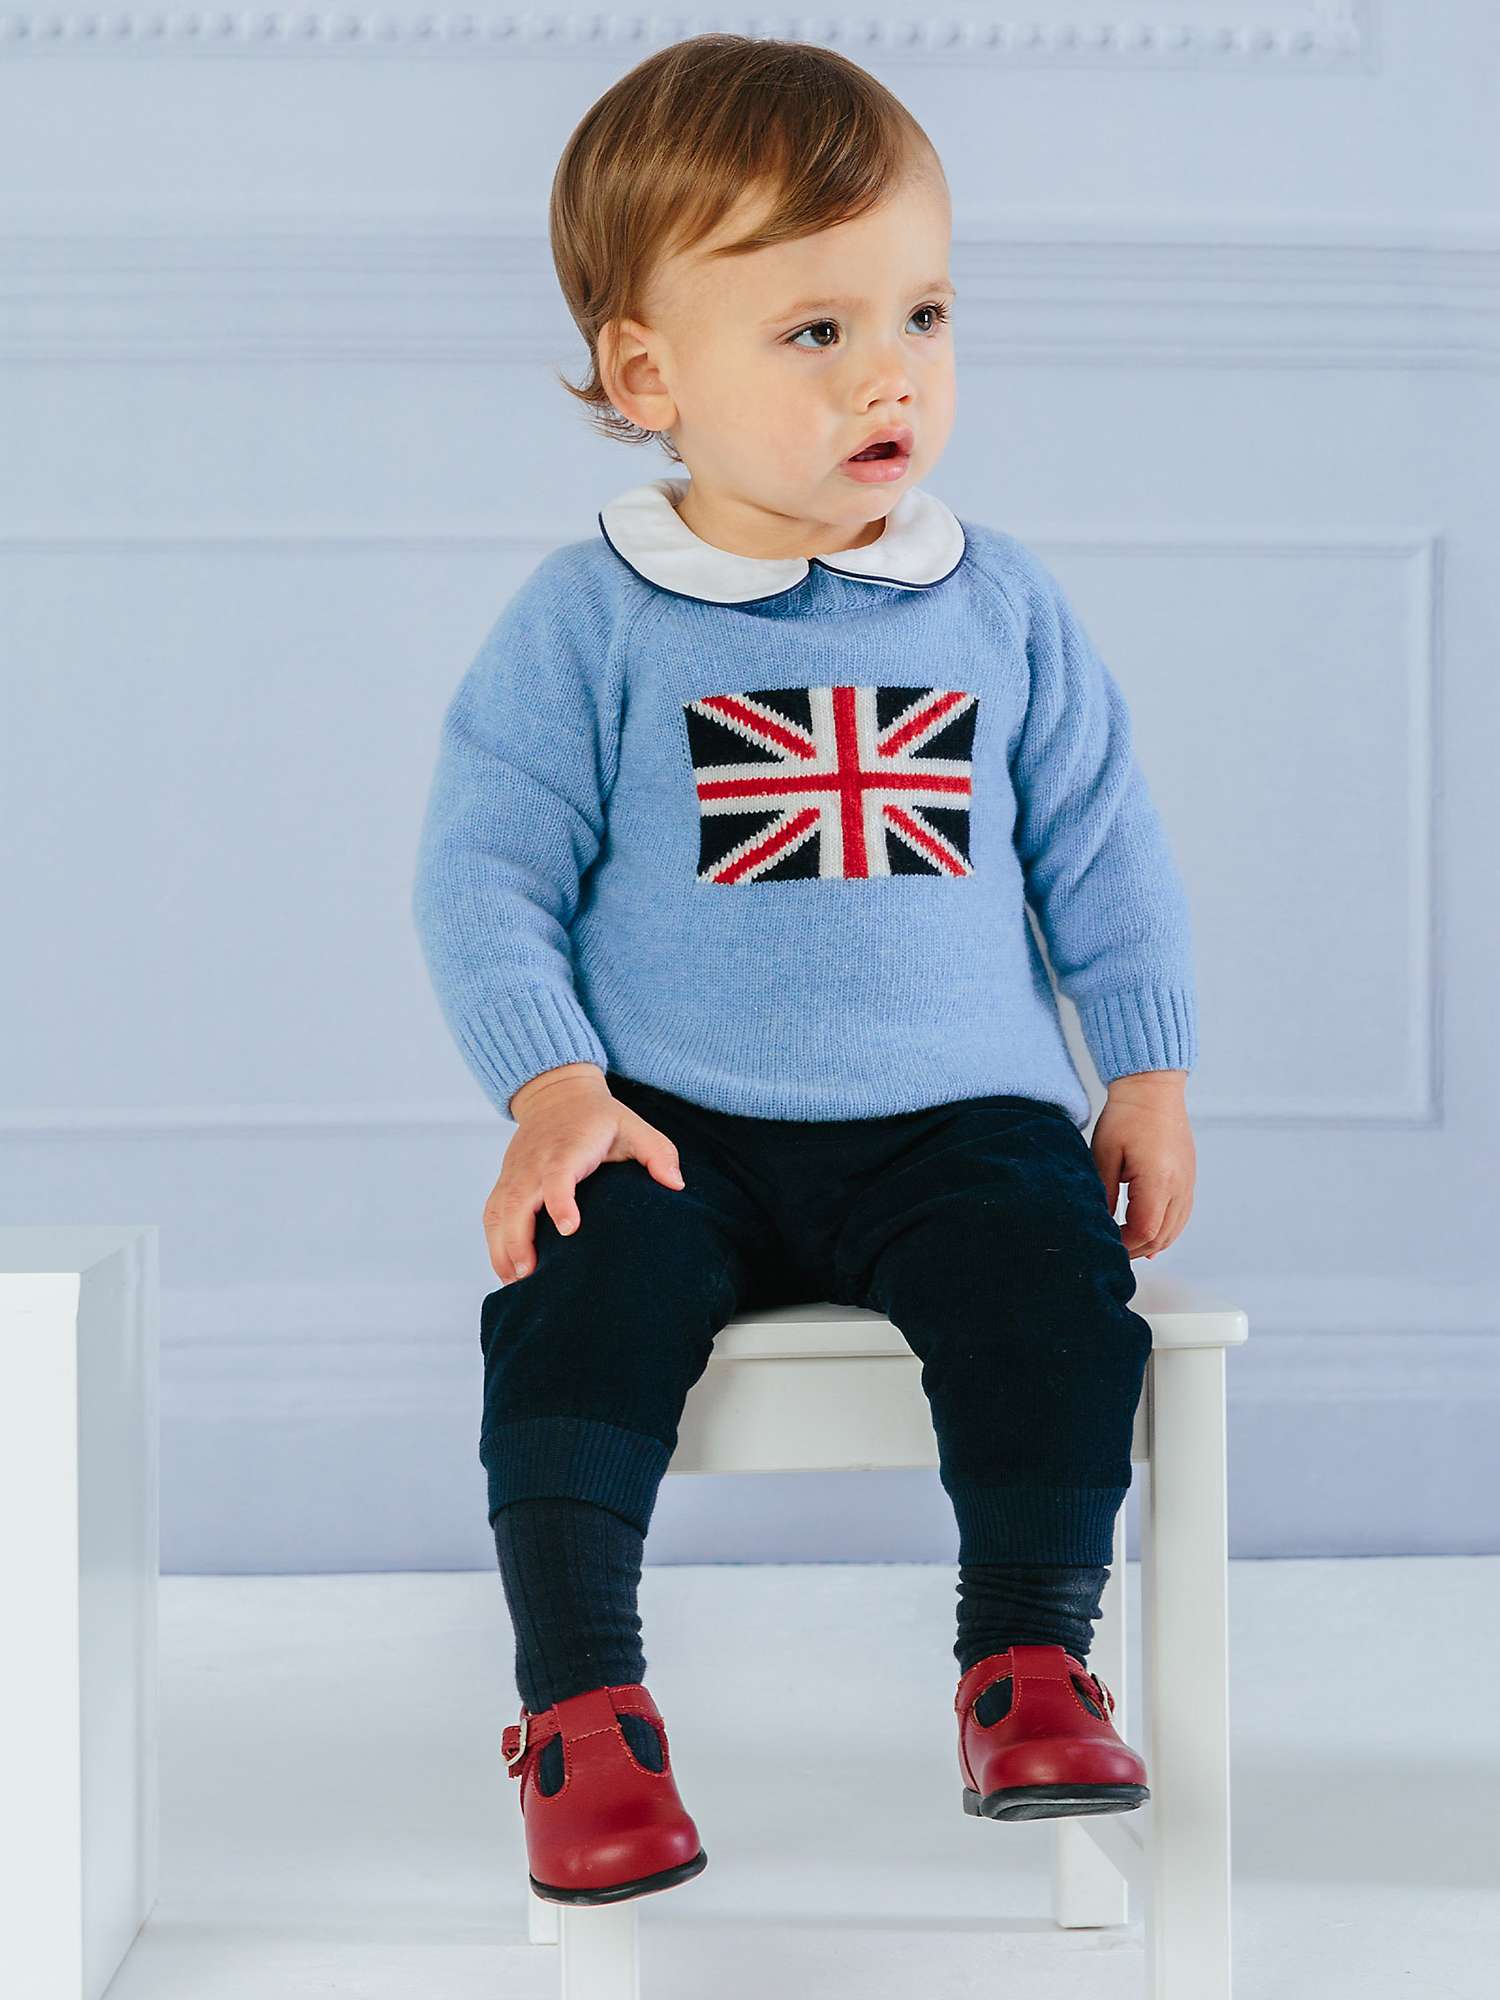 Buy Trotters Baby George Union Jack Graphic Jumper, Pale Blue Online at johnlewis.com